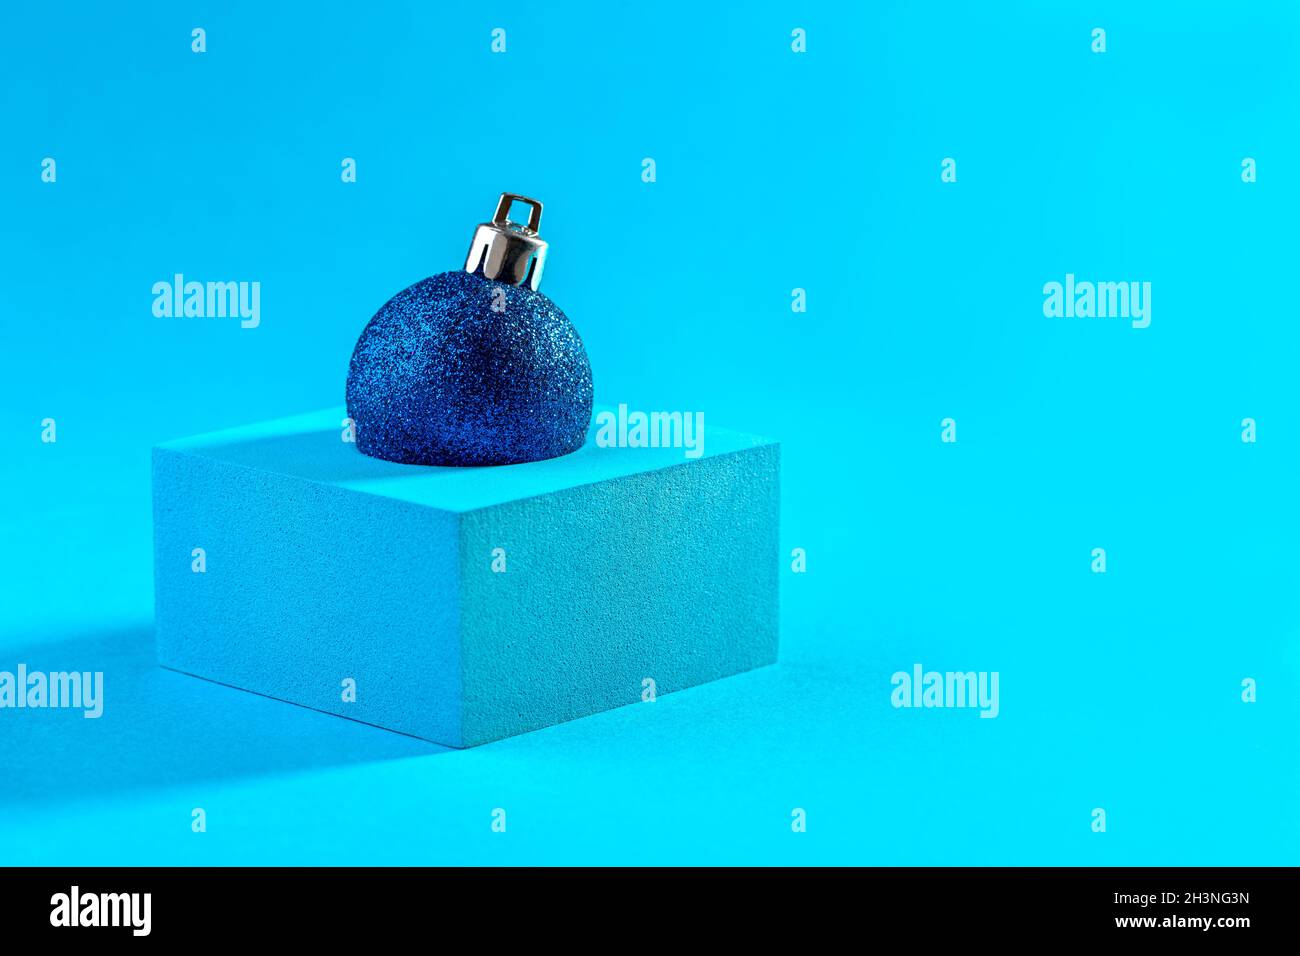 Abstract Christmas card with a shiny blue ball. Stock Photo